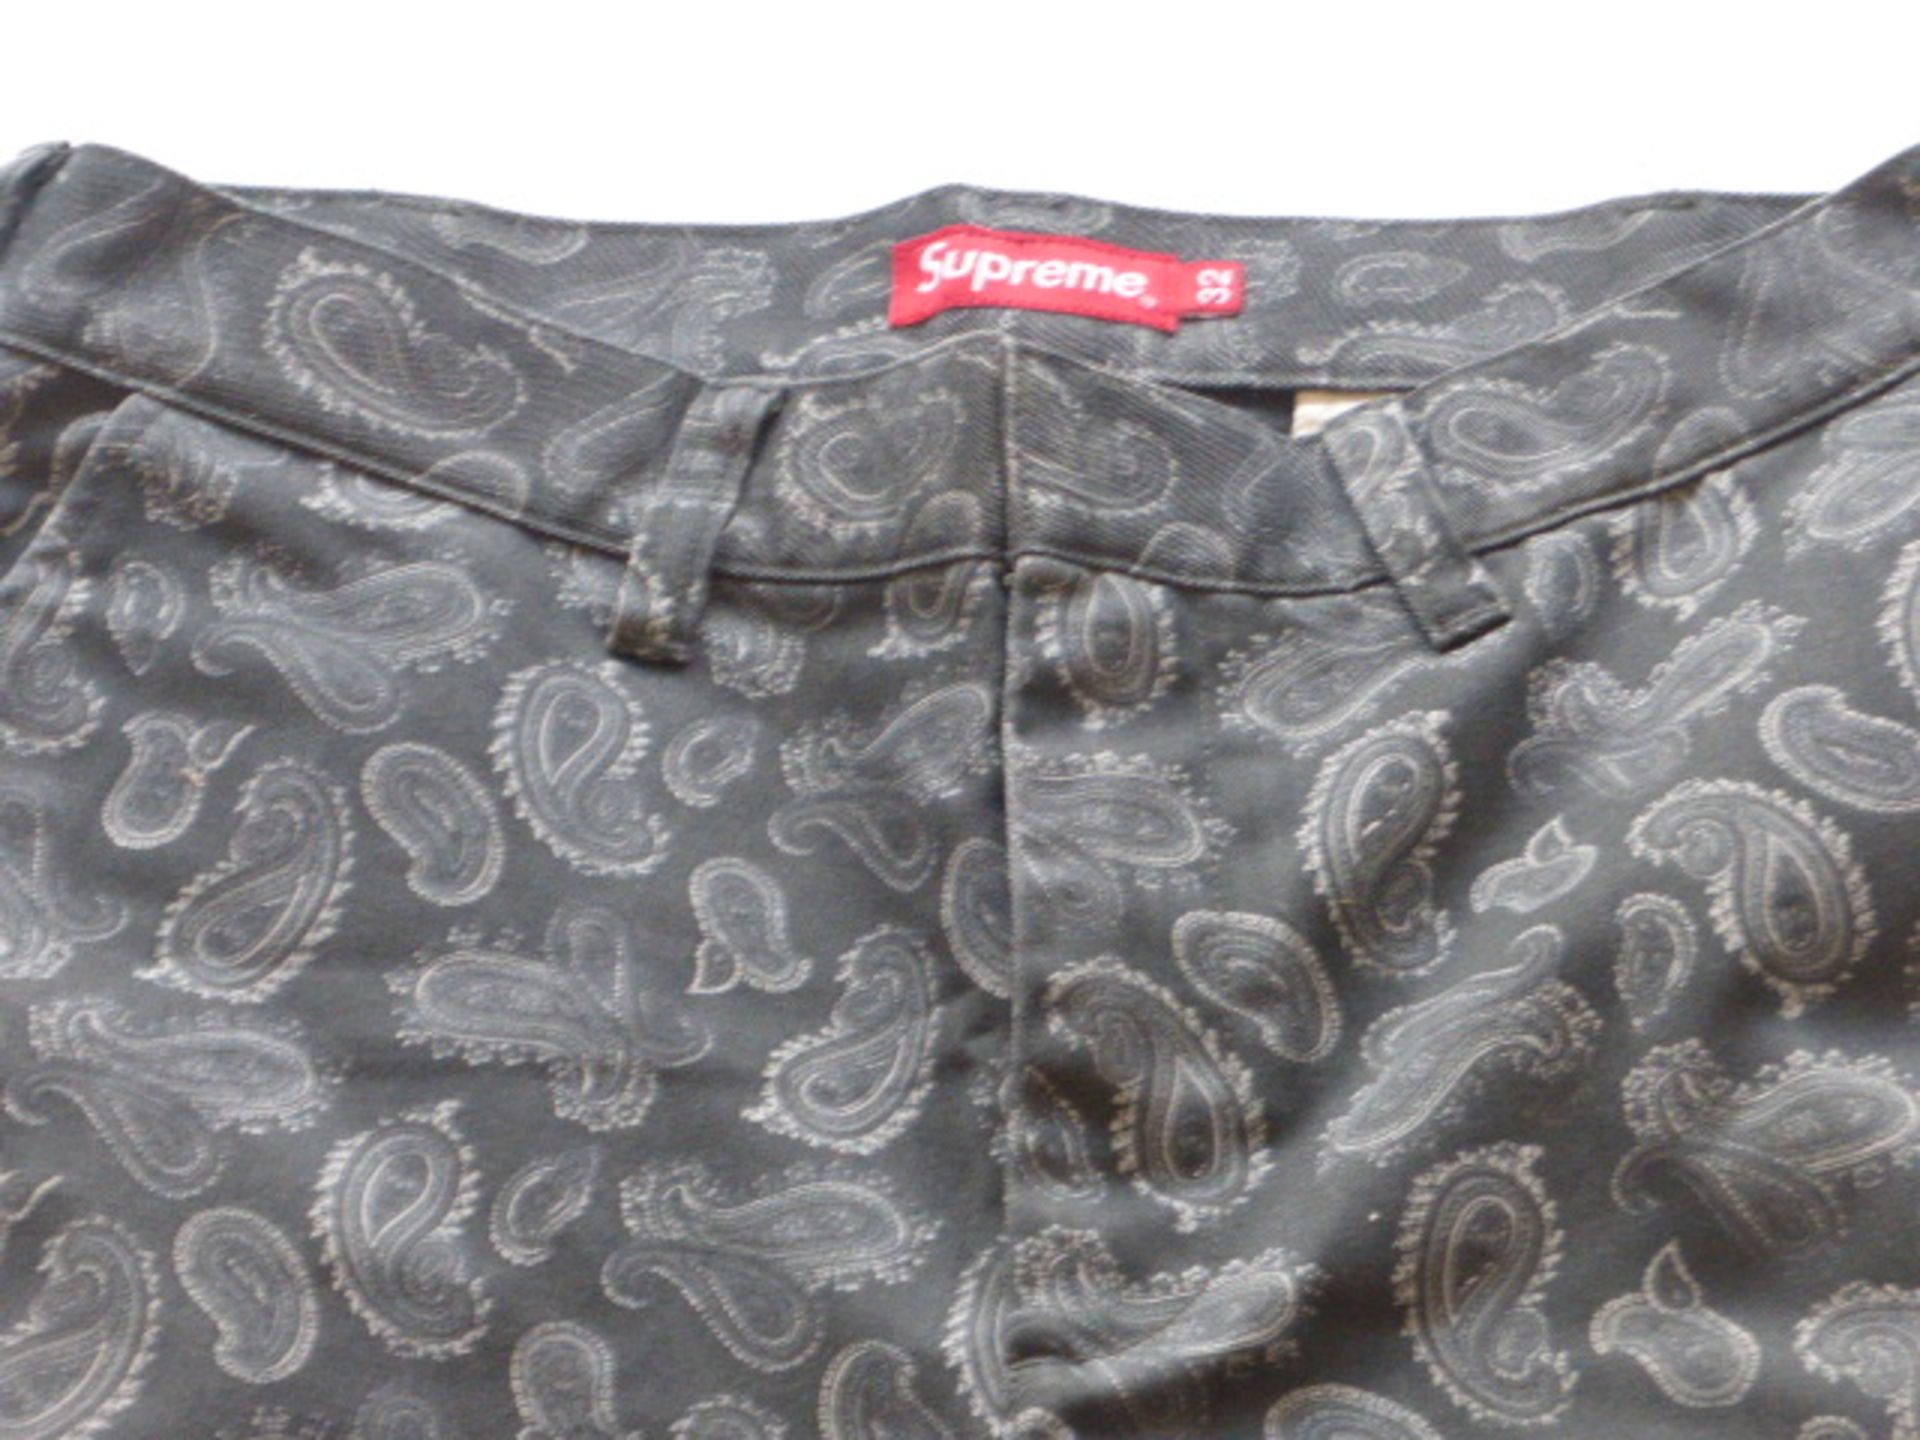 Supreme paisley print chino trousers in grey size 32 - Image 2 of 2